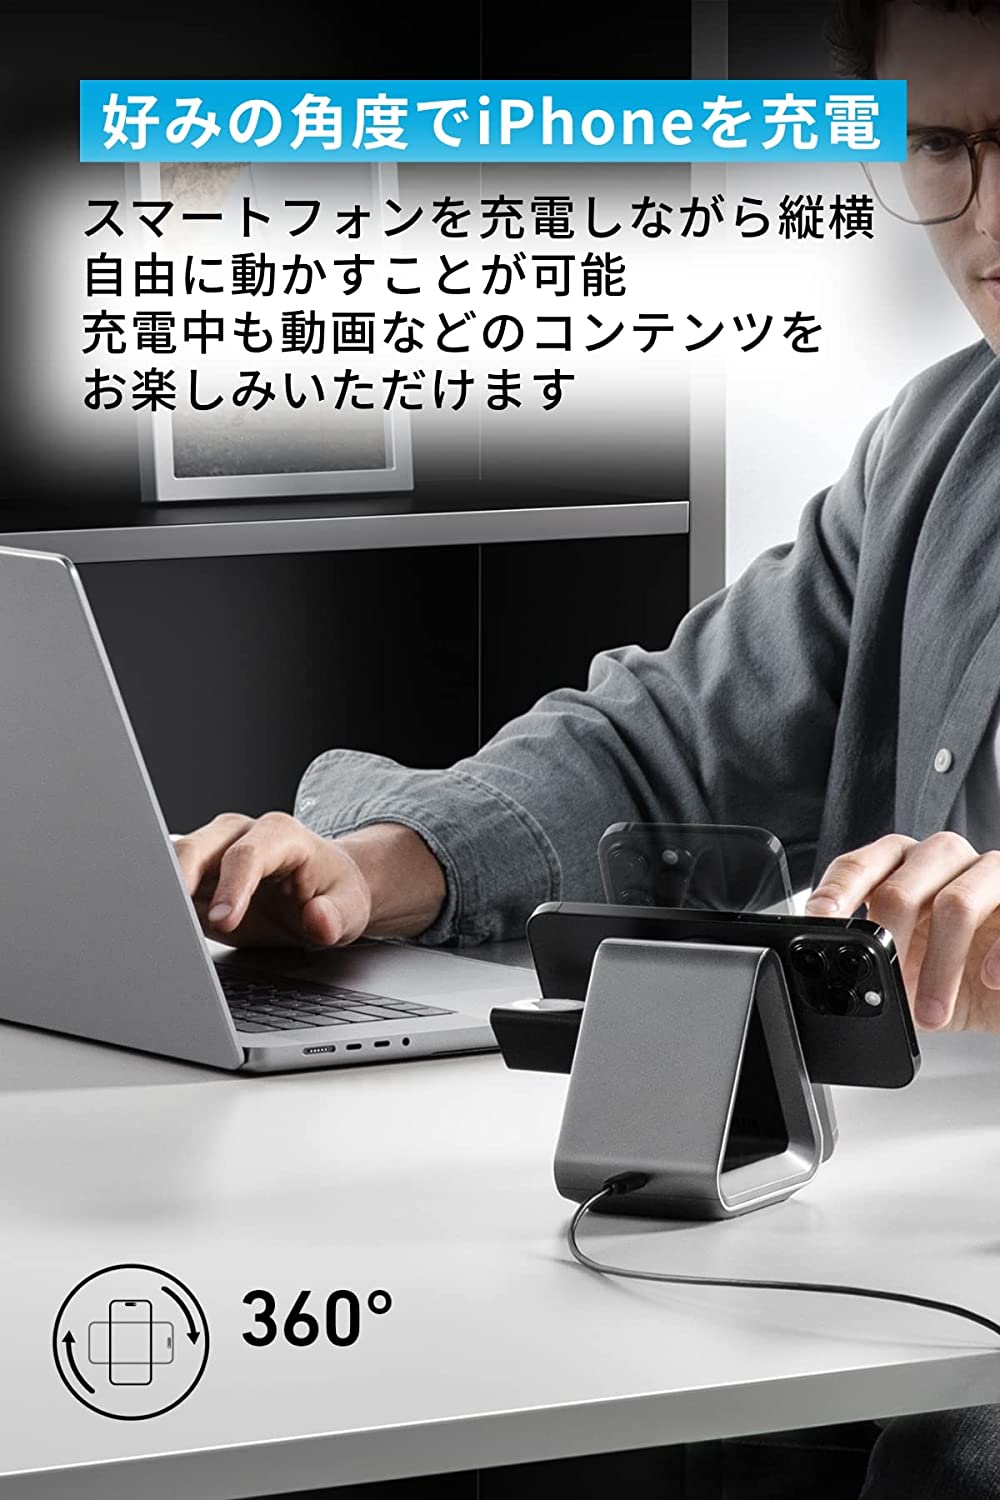 Anker 737 MagGo Charger (3-in-1 Station) (マグネット式 3-in-1 